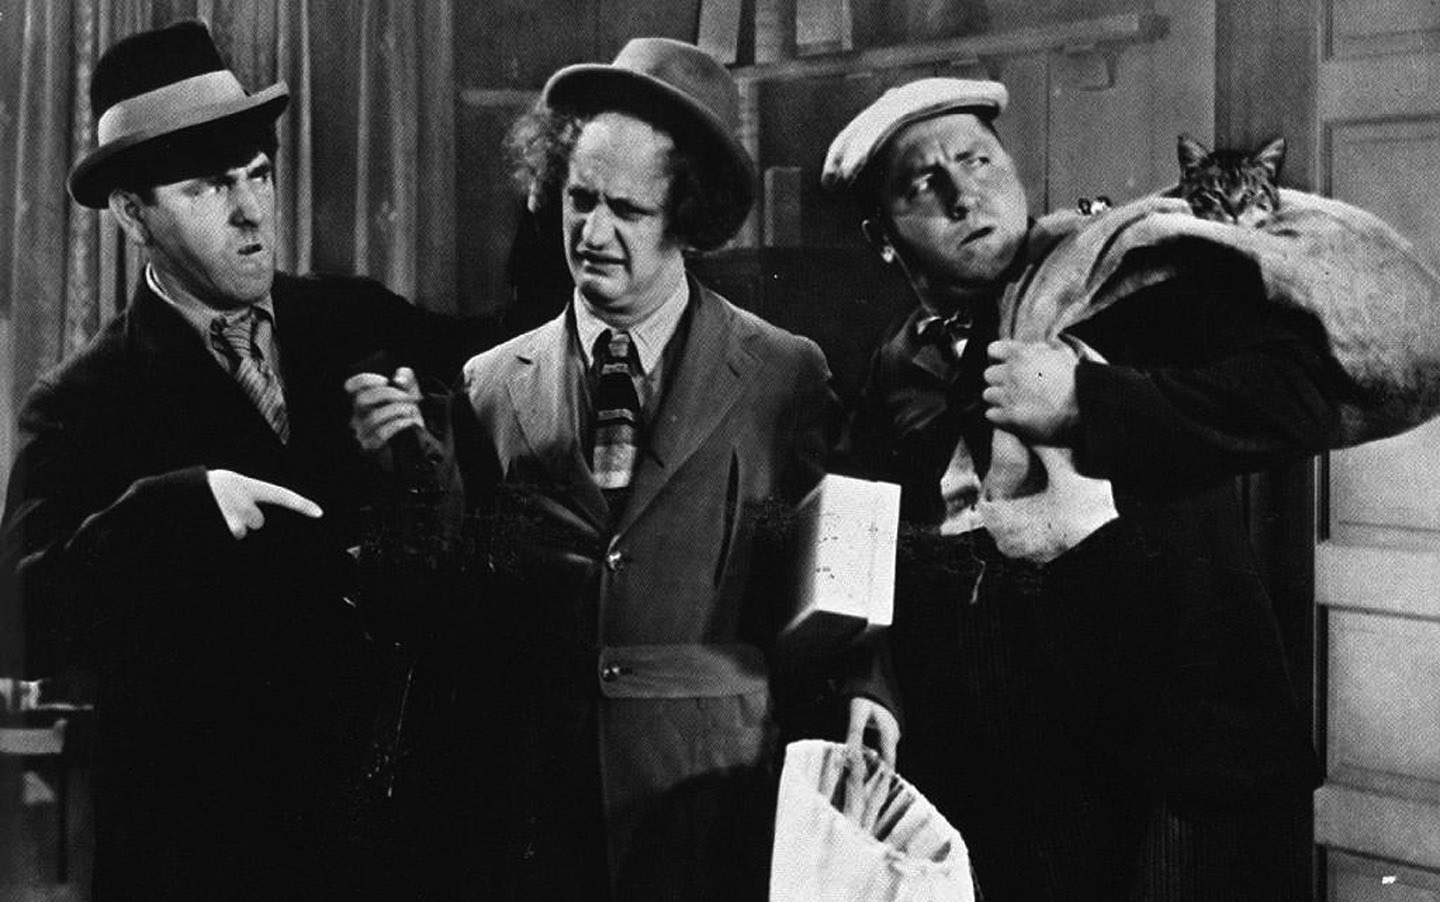 The Three Stooges Wallpaper. The Three Stooges Background